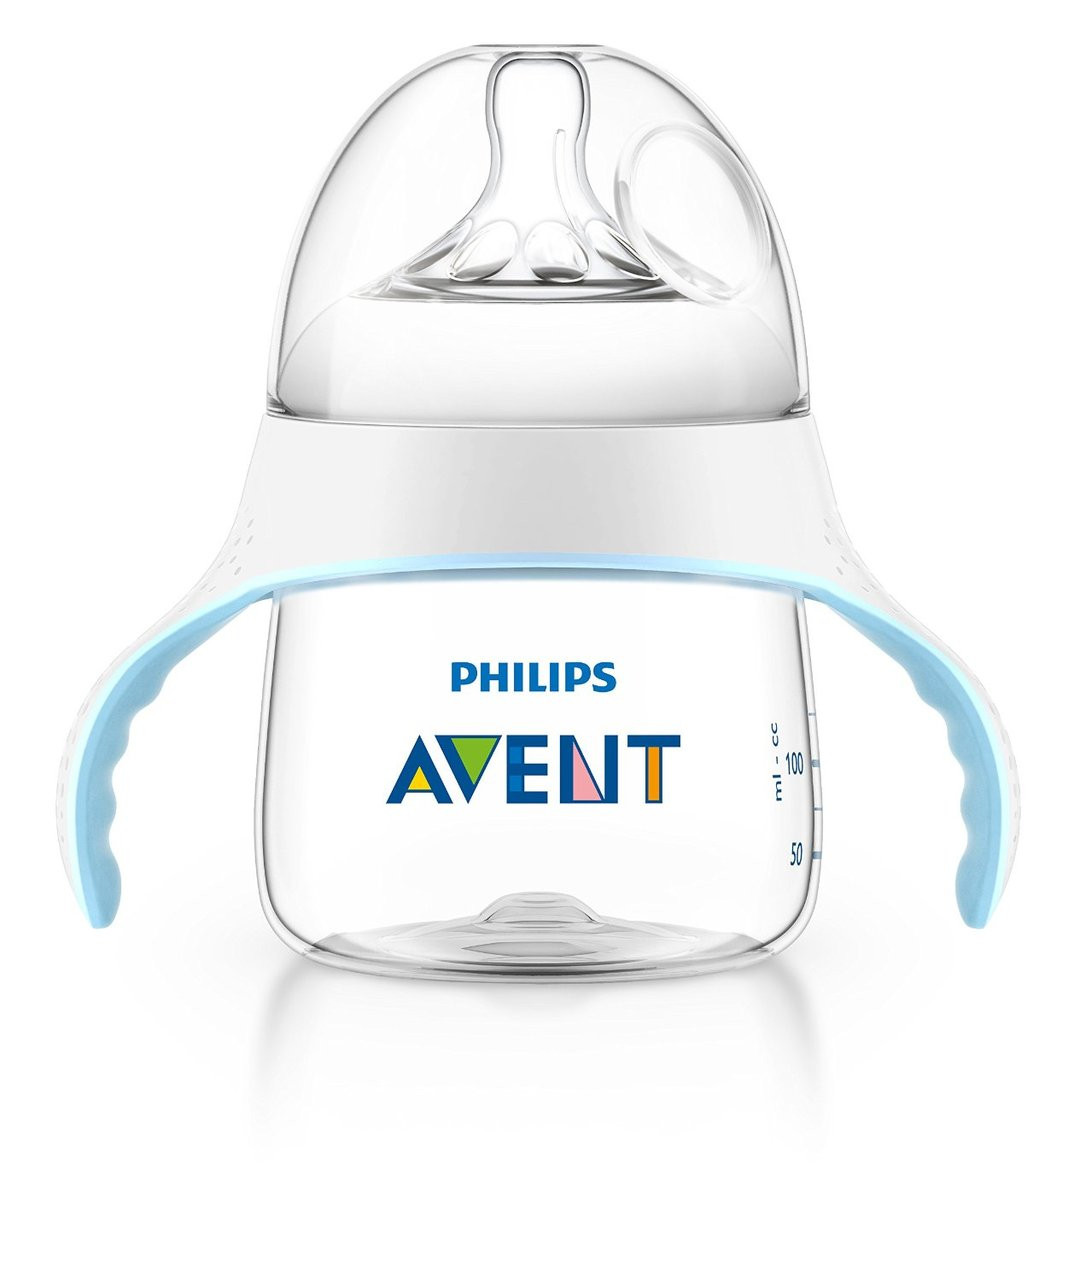 Avent Natural Bottle First Cup Trainer, 4+ m, 5 oz, 1 pk Clear - Parents'